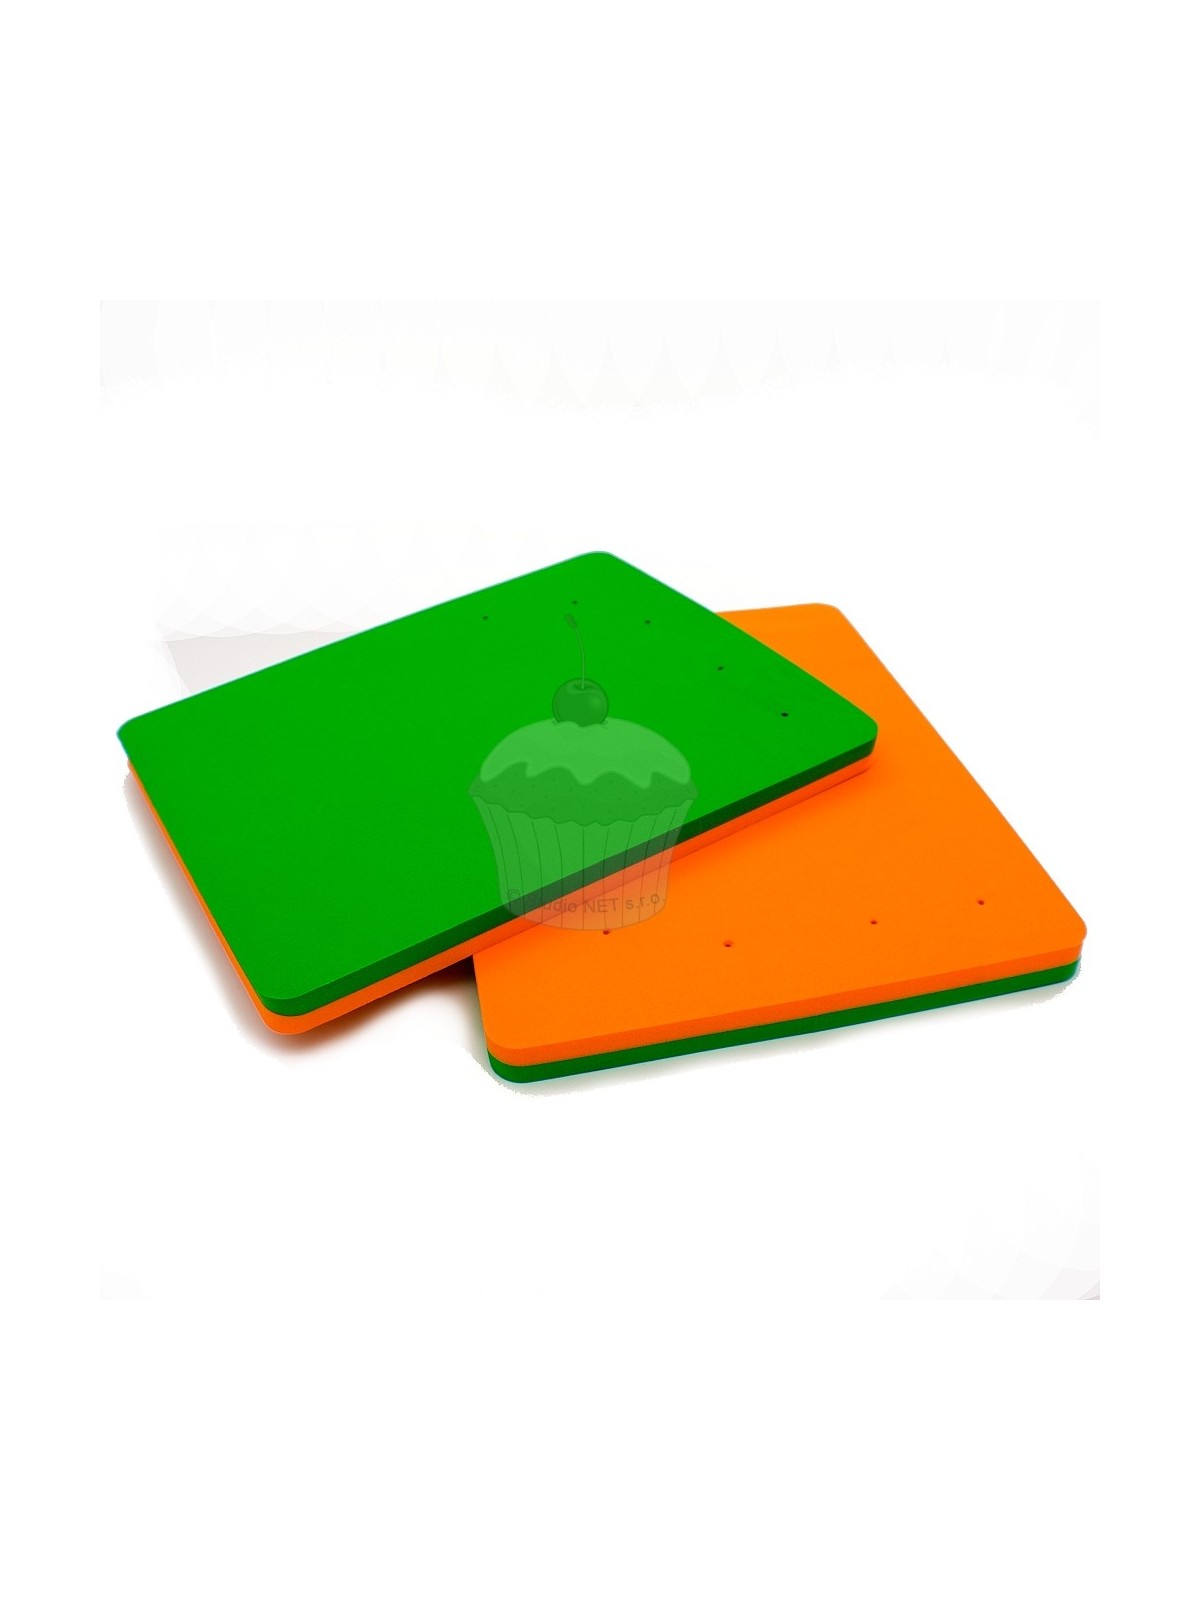 Mexican and Flower Foam Pad - orange - green